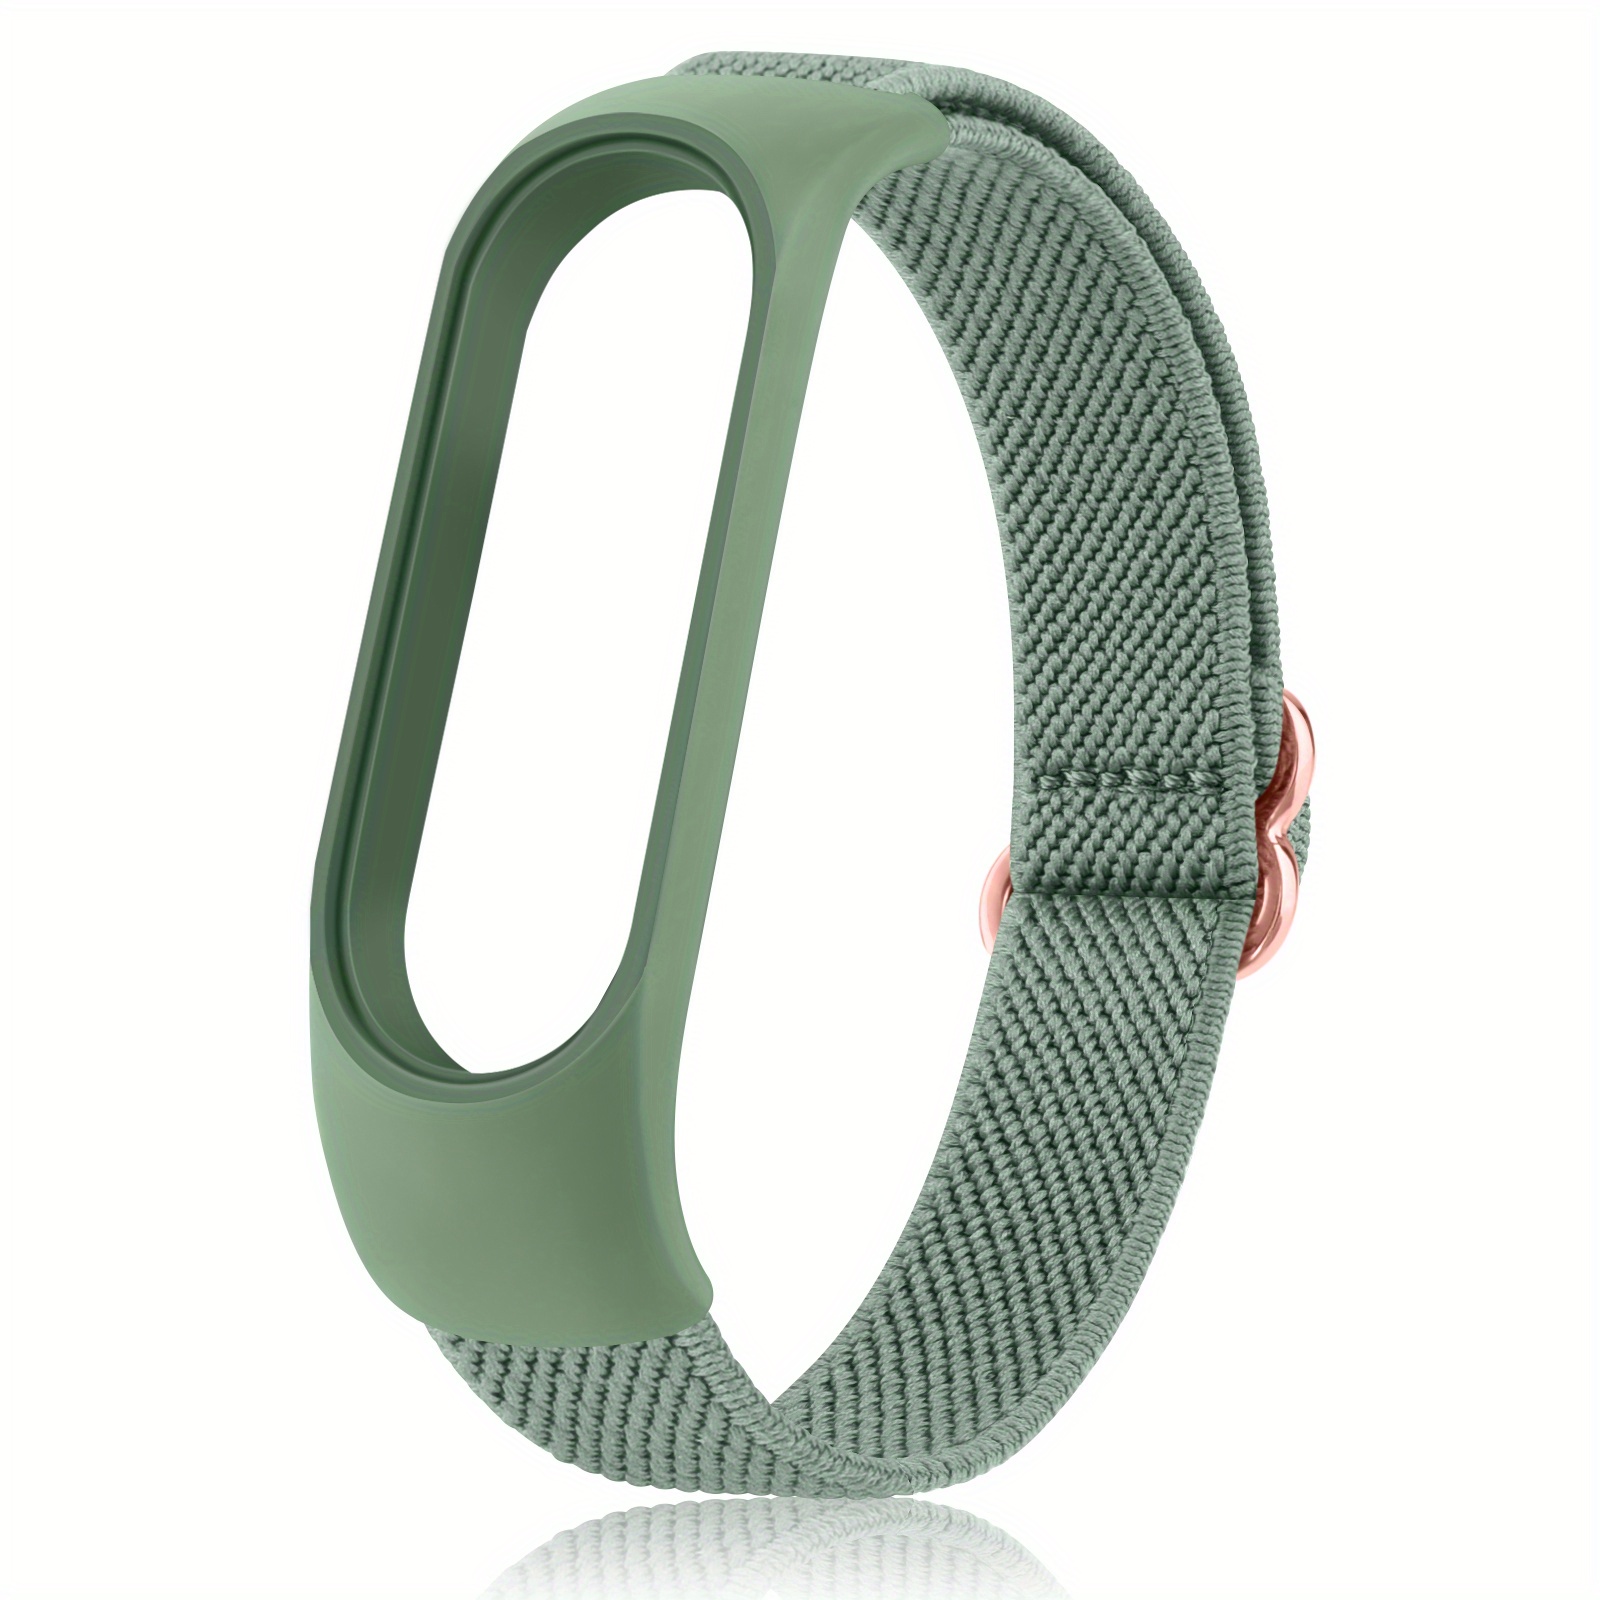 

Adjustable Elastic Loop Strap For Xiaomi /6/5/4/3 - Durable Nylon Replacement Wristband, Compatible With Amazfit Band 5